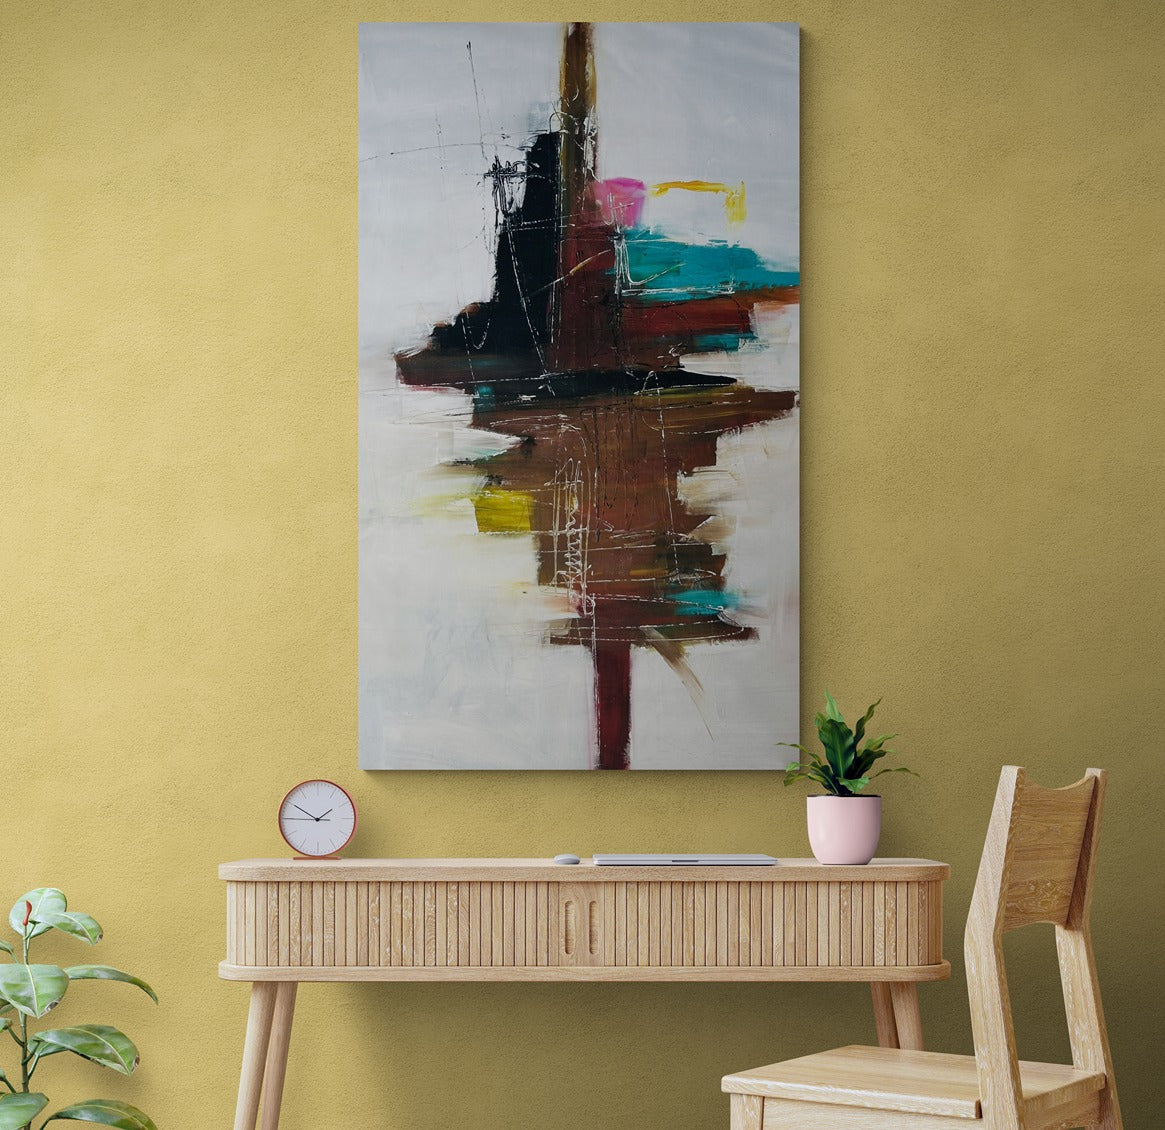 Abstract canvas wall art, hand-painted and large in size, hangs above a wooden study desk and chair, enhancing the ambiance of the workspace with creativity and inspiration.